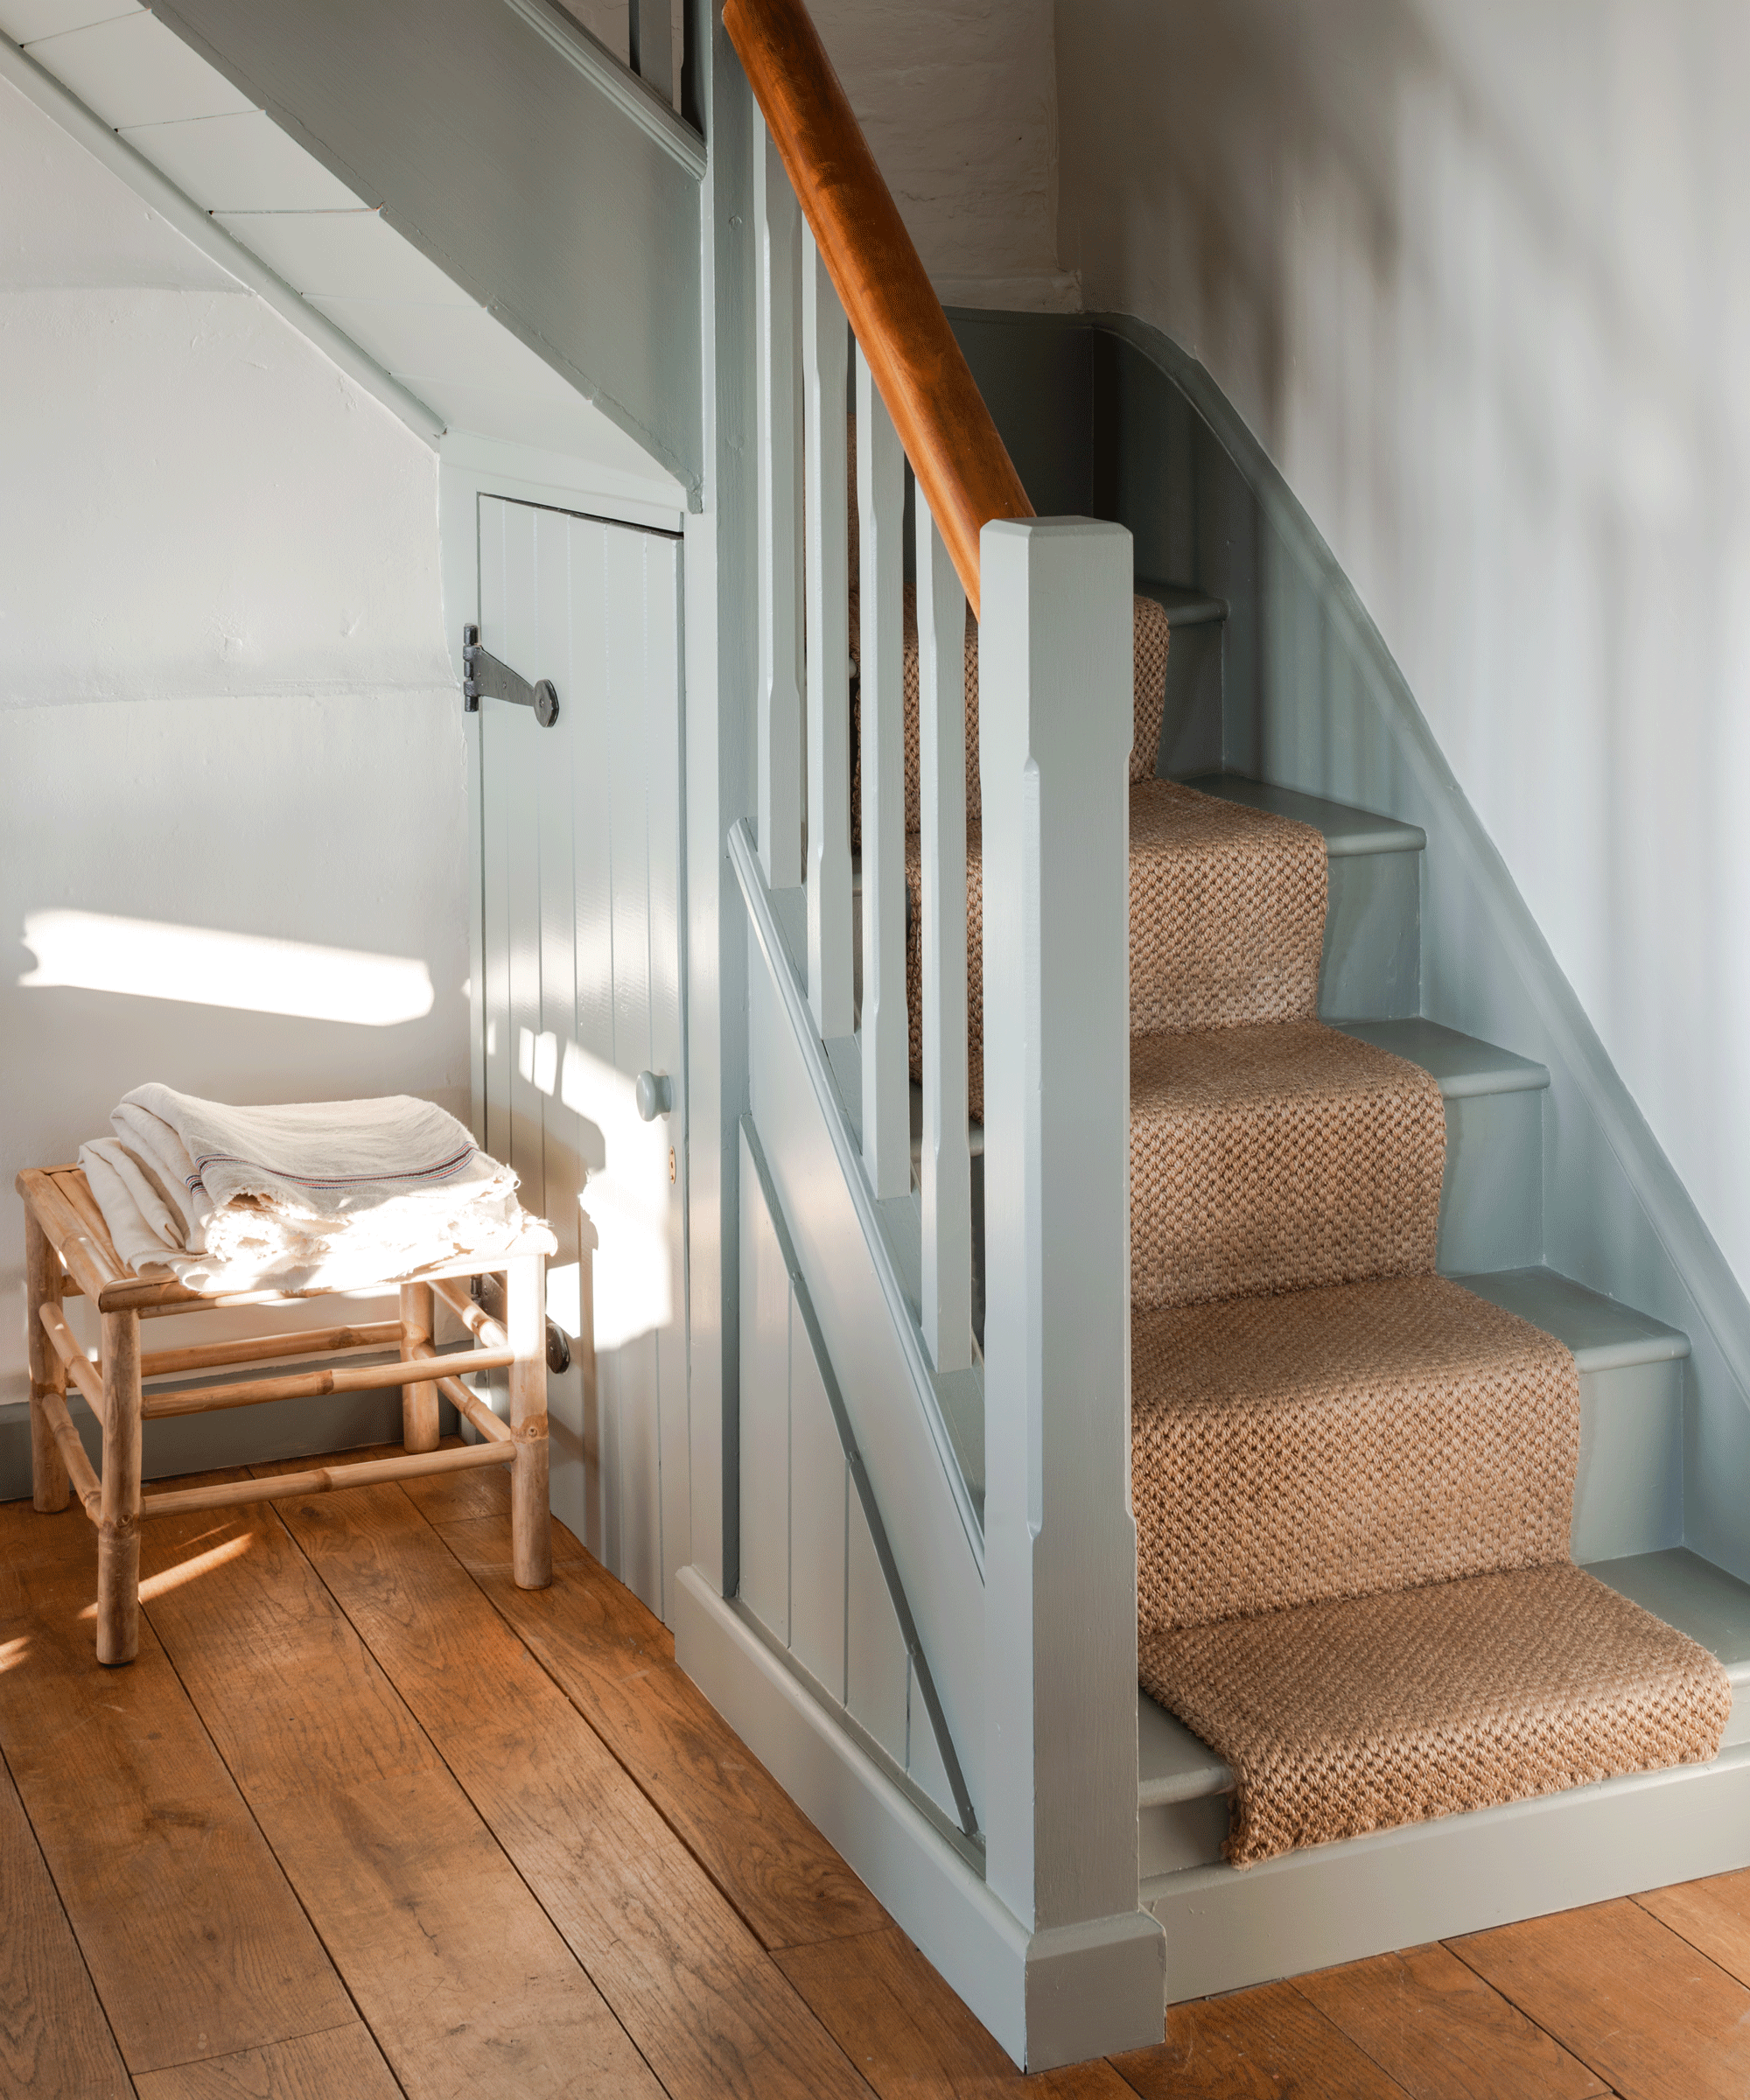 Wooden staircase painted in blue grey